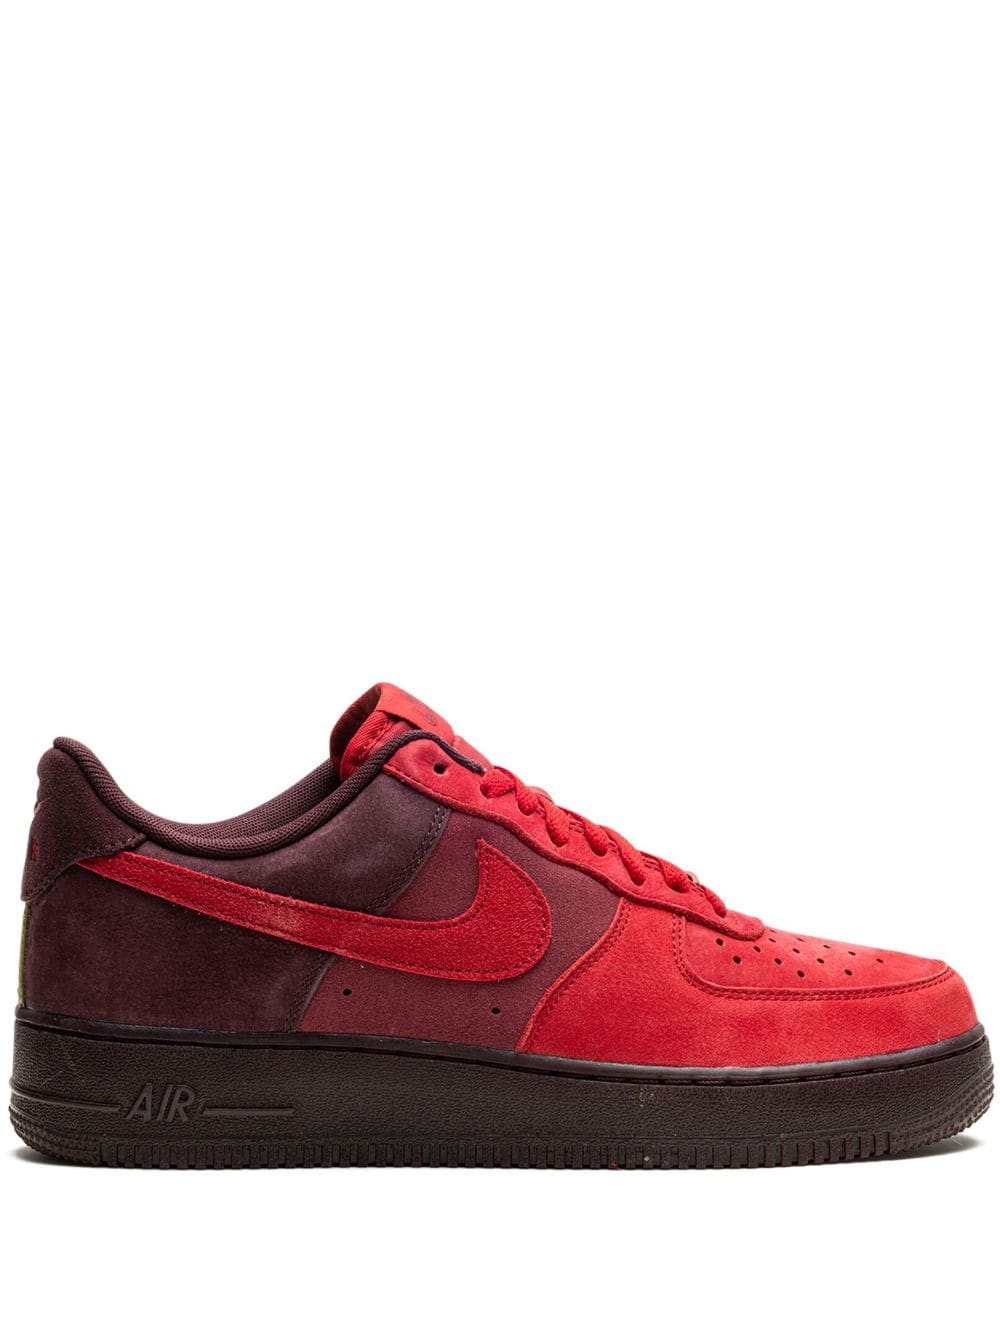 Nike Air Force 1 Low "Layers of Love" sneakers - Red von Nike